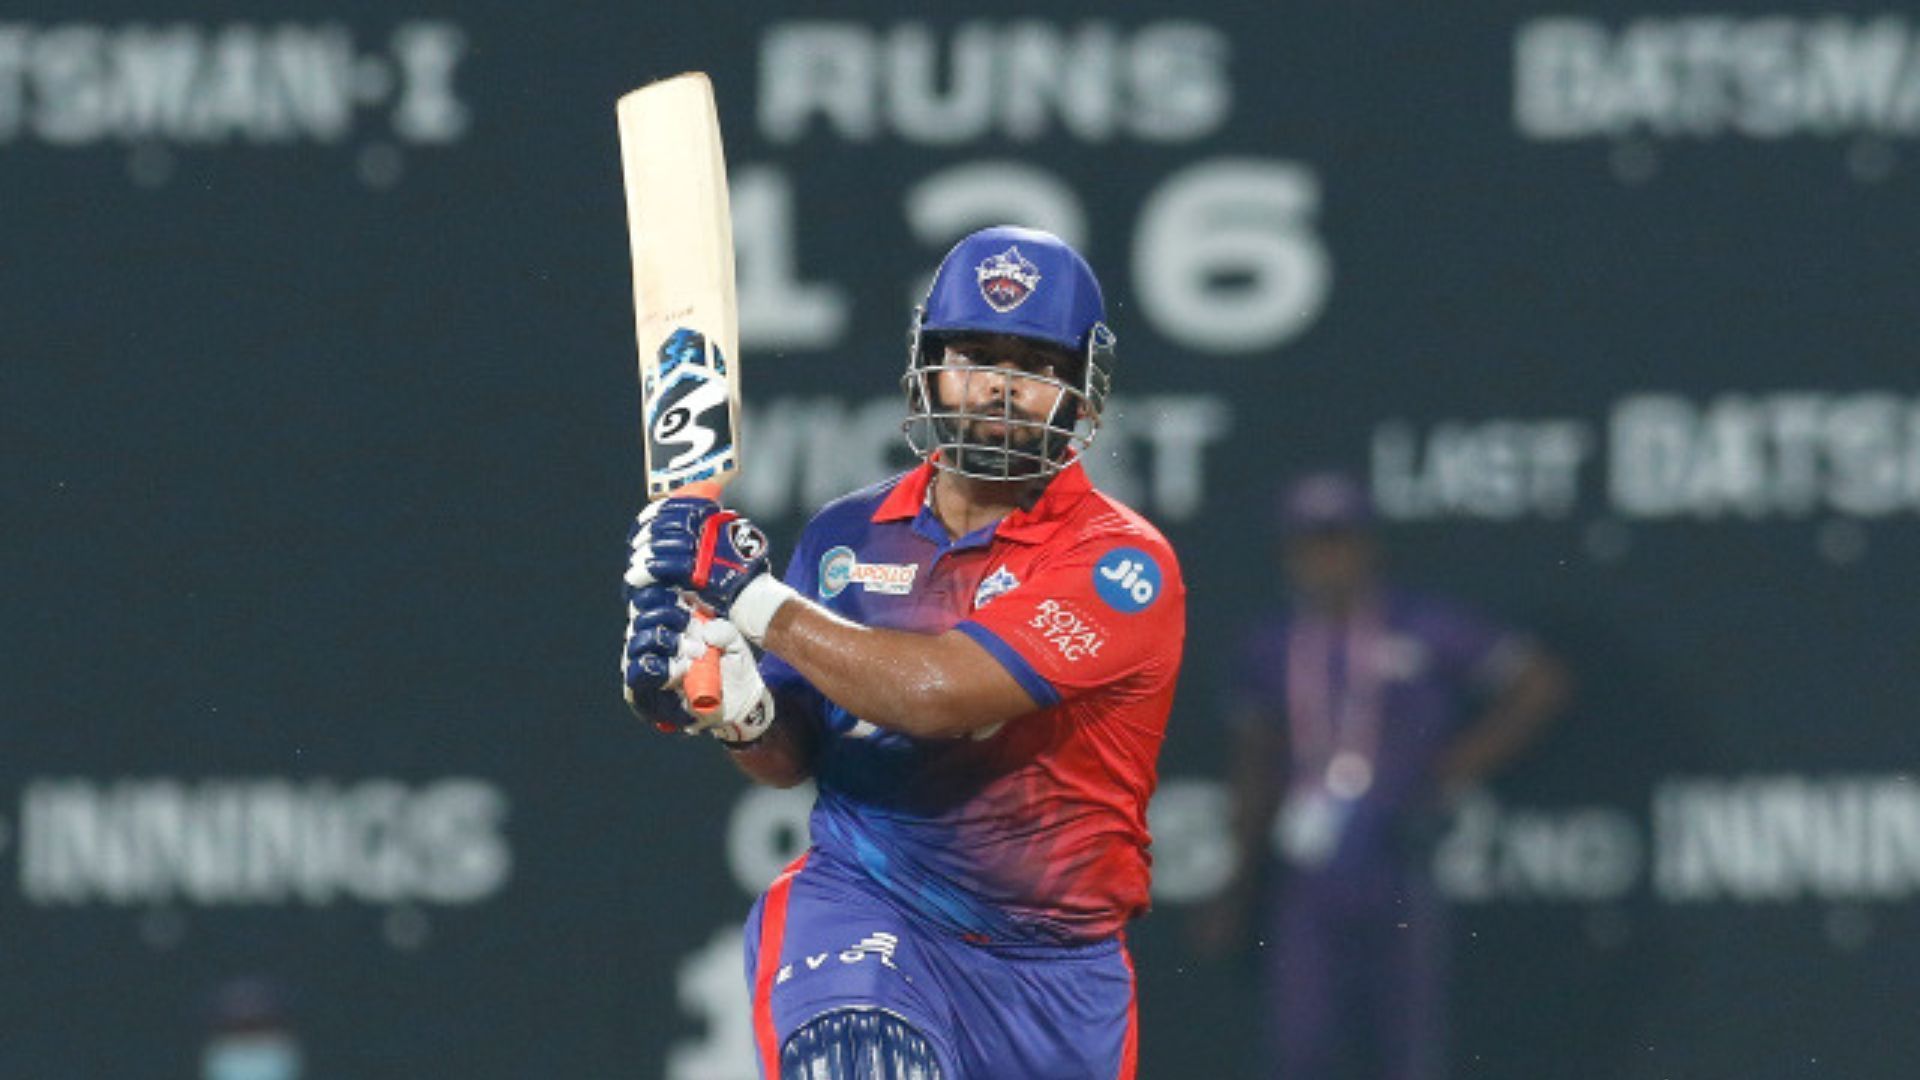 Rishabh Pant has looked good but is still without a fifty this IPL so far. (P.C.:iplt20.com)